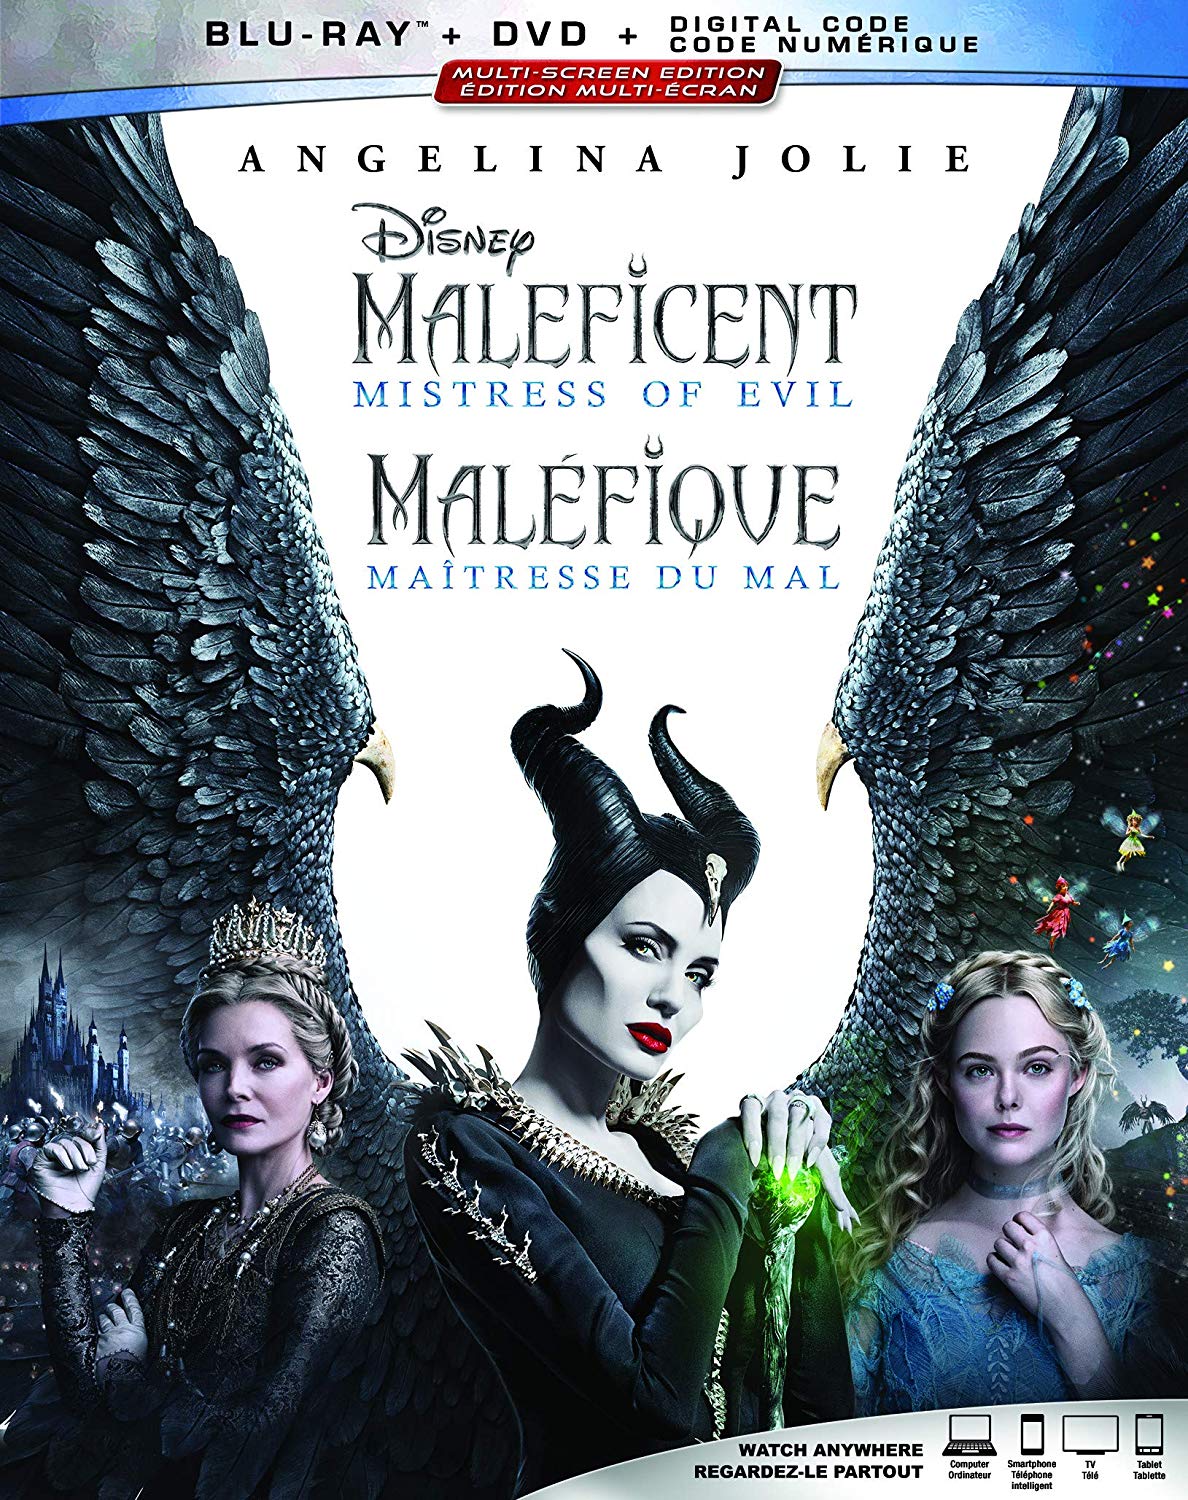 Maleficent: Mistress of Evil Blu-ray and DVD